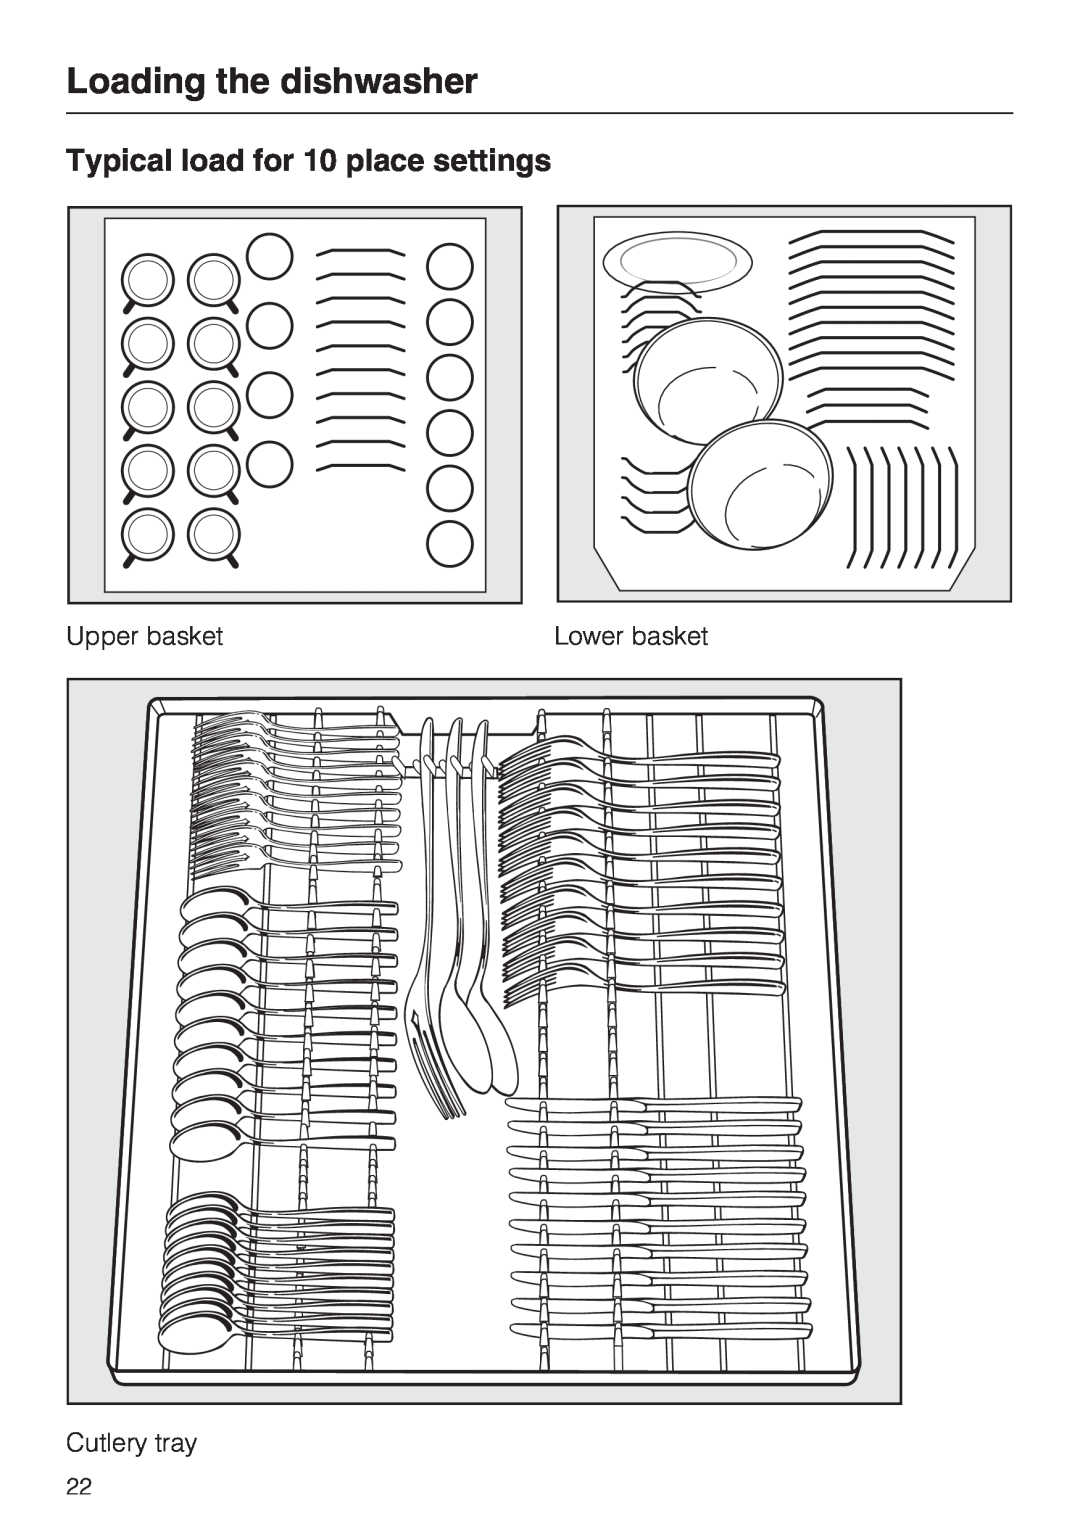 Miele G 5970, G 5795 Typical load for 10 place settings, Loading the dishwasher, Upper basket, Lower basket, Cutlery tray 